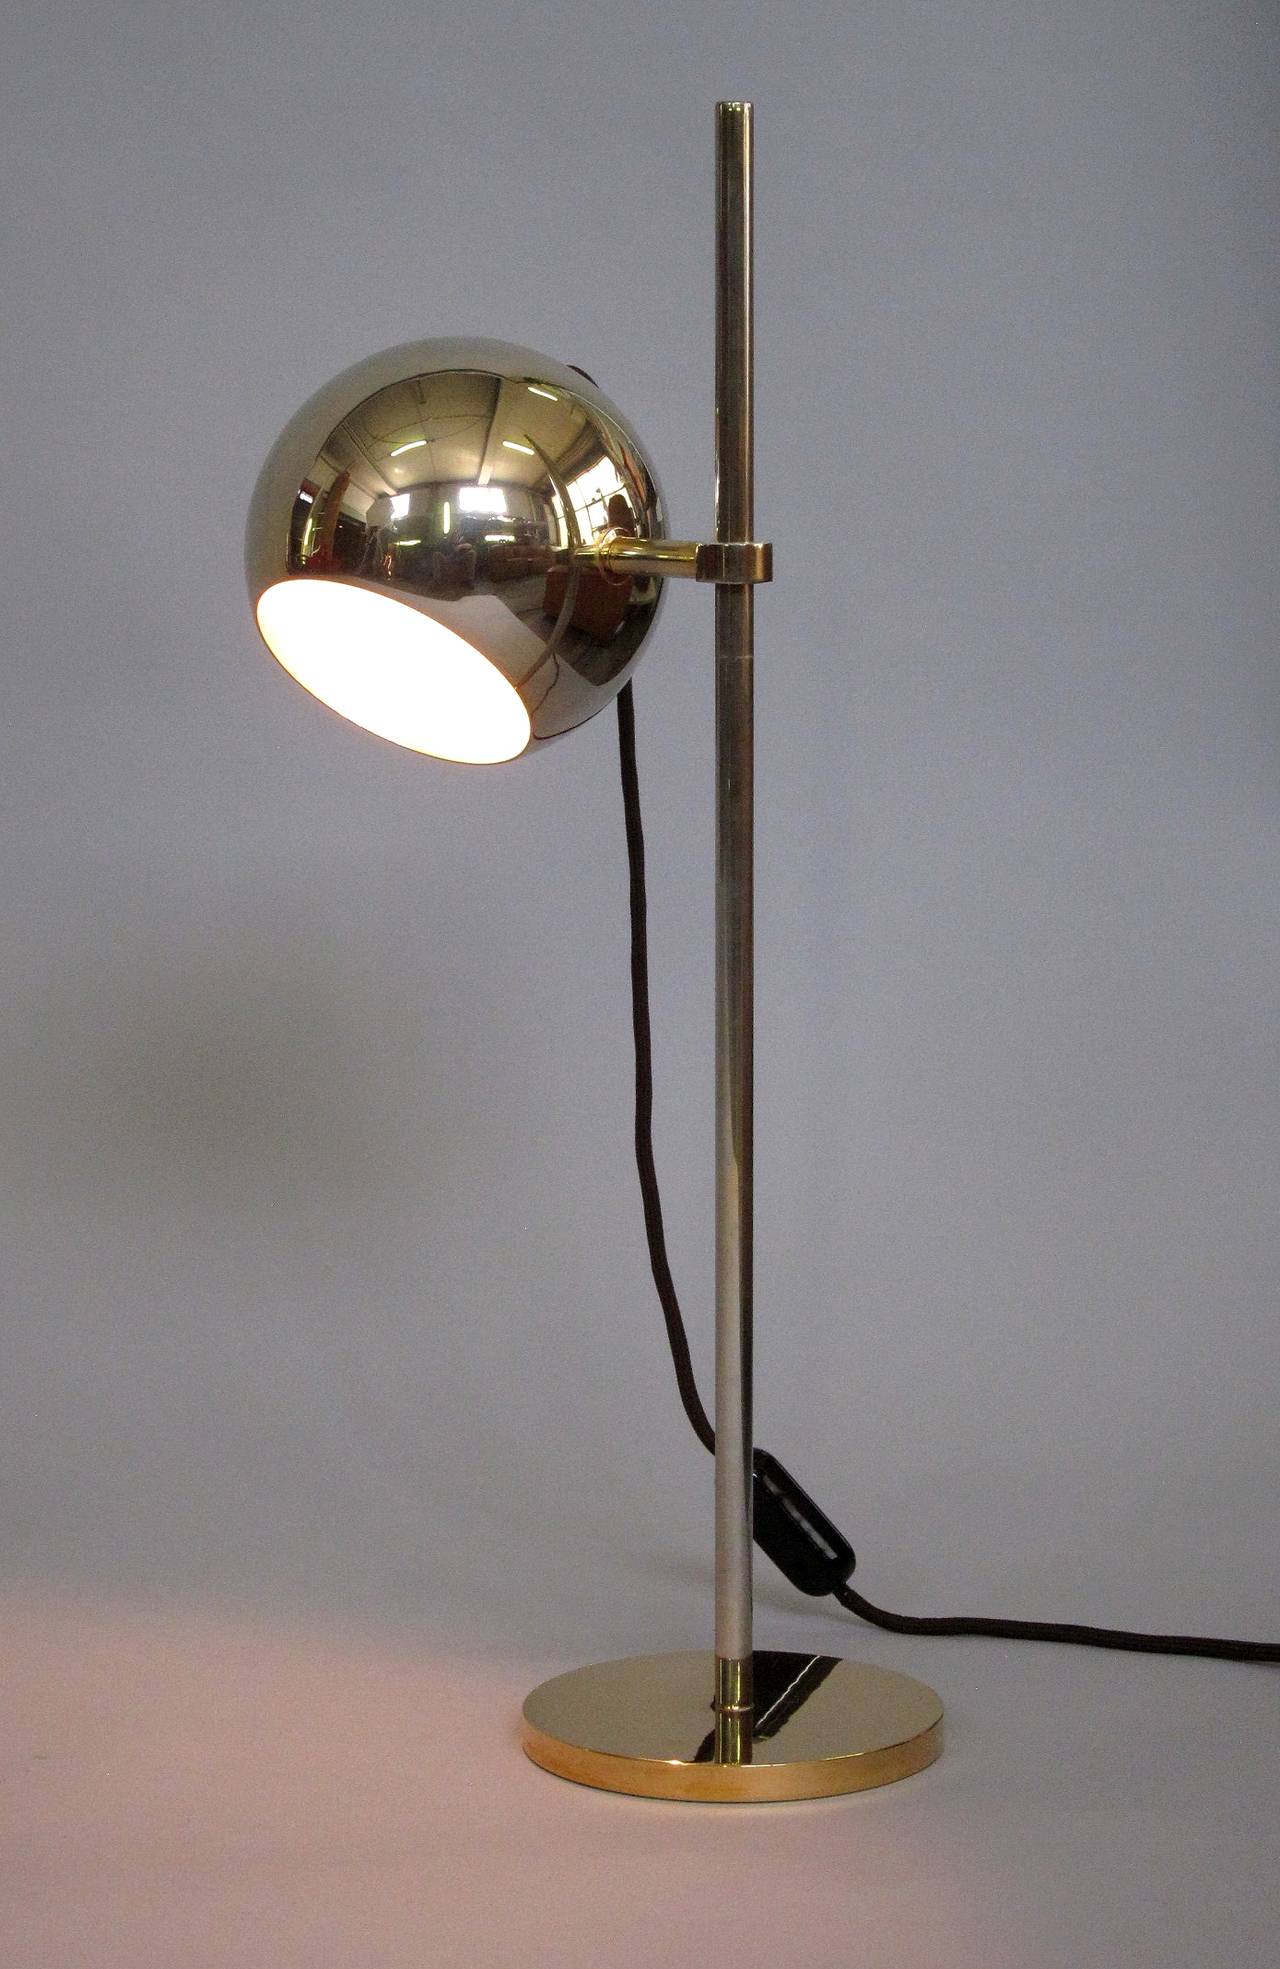 Adjustable gilded Table Lamp manufactured by Stilnovo, Italy 1970's